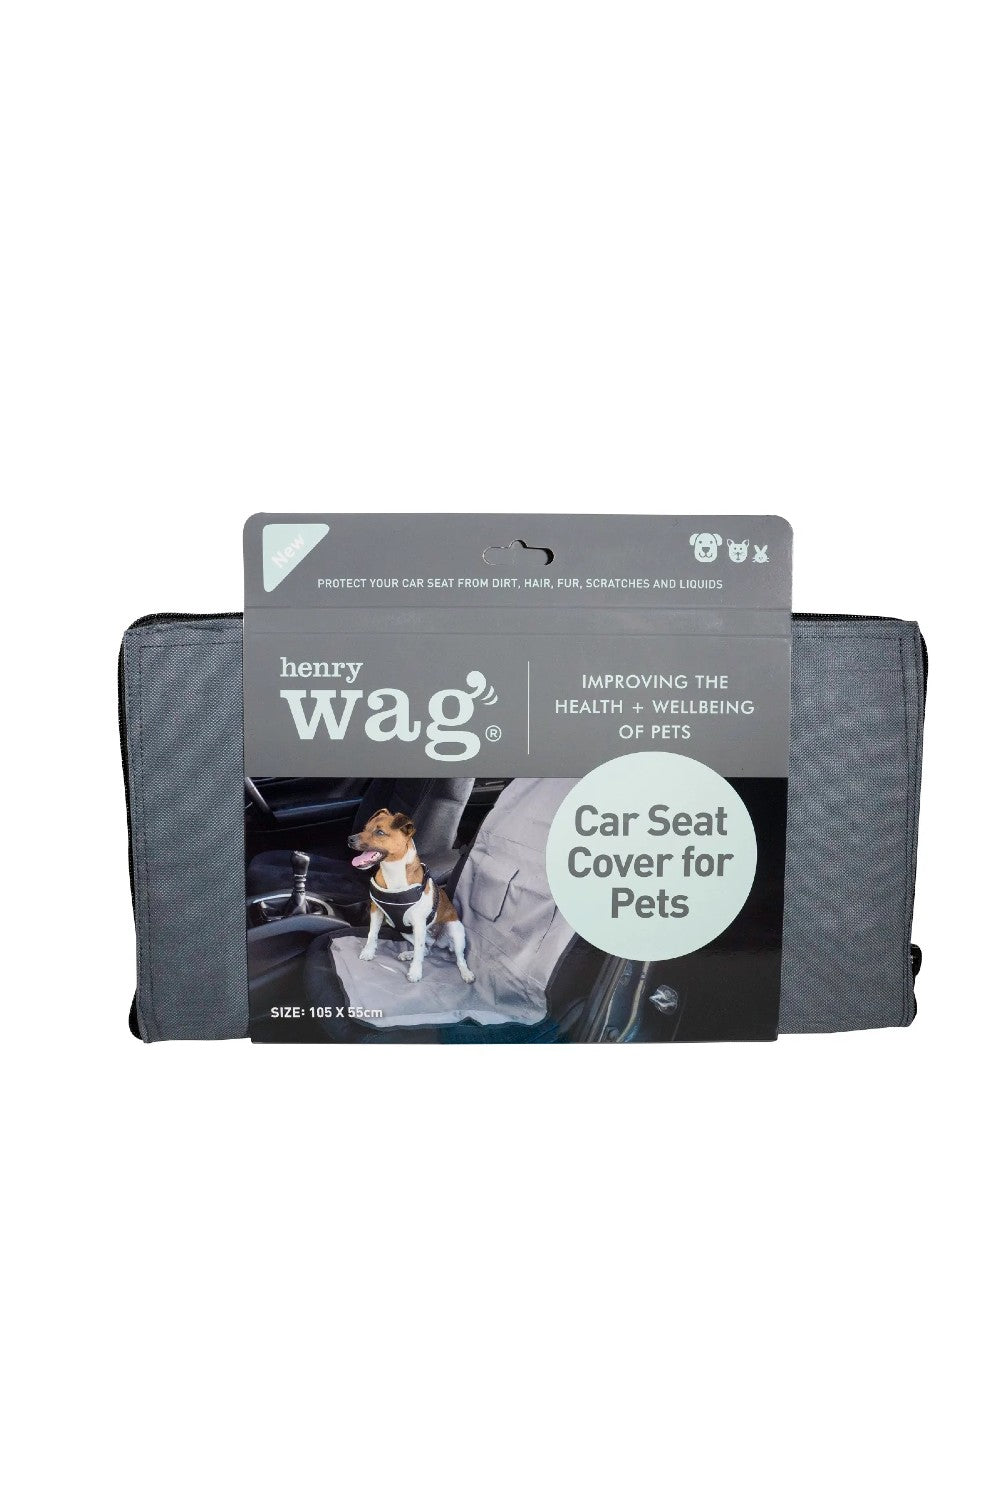 Henry Wag Single Car Seat Cover In Grey/Black